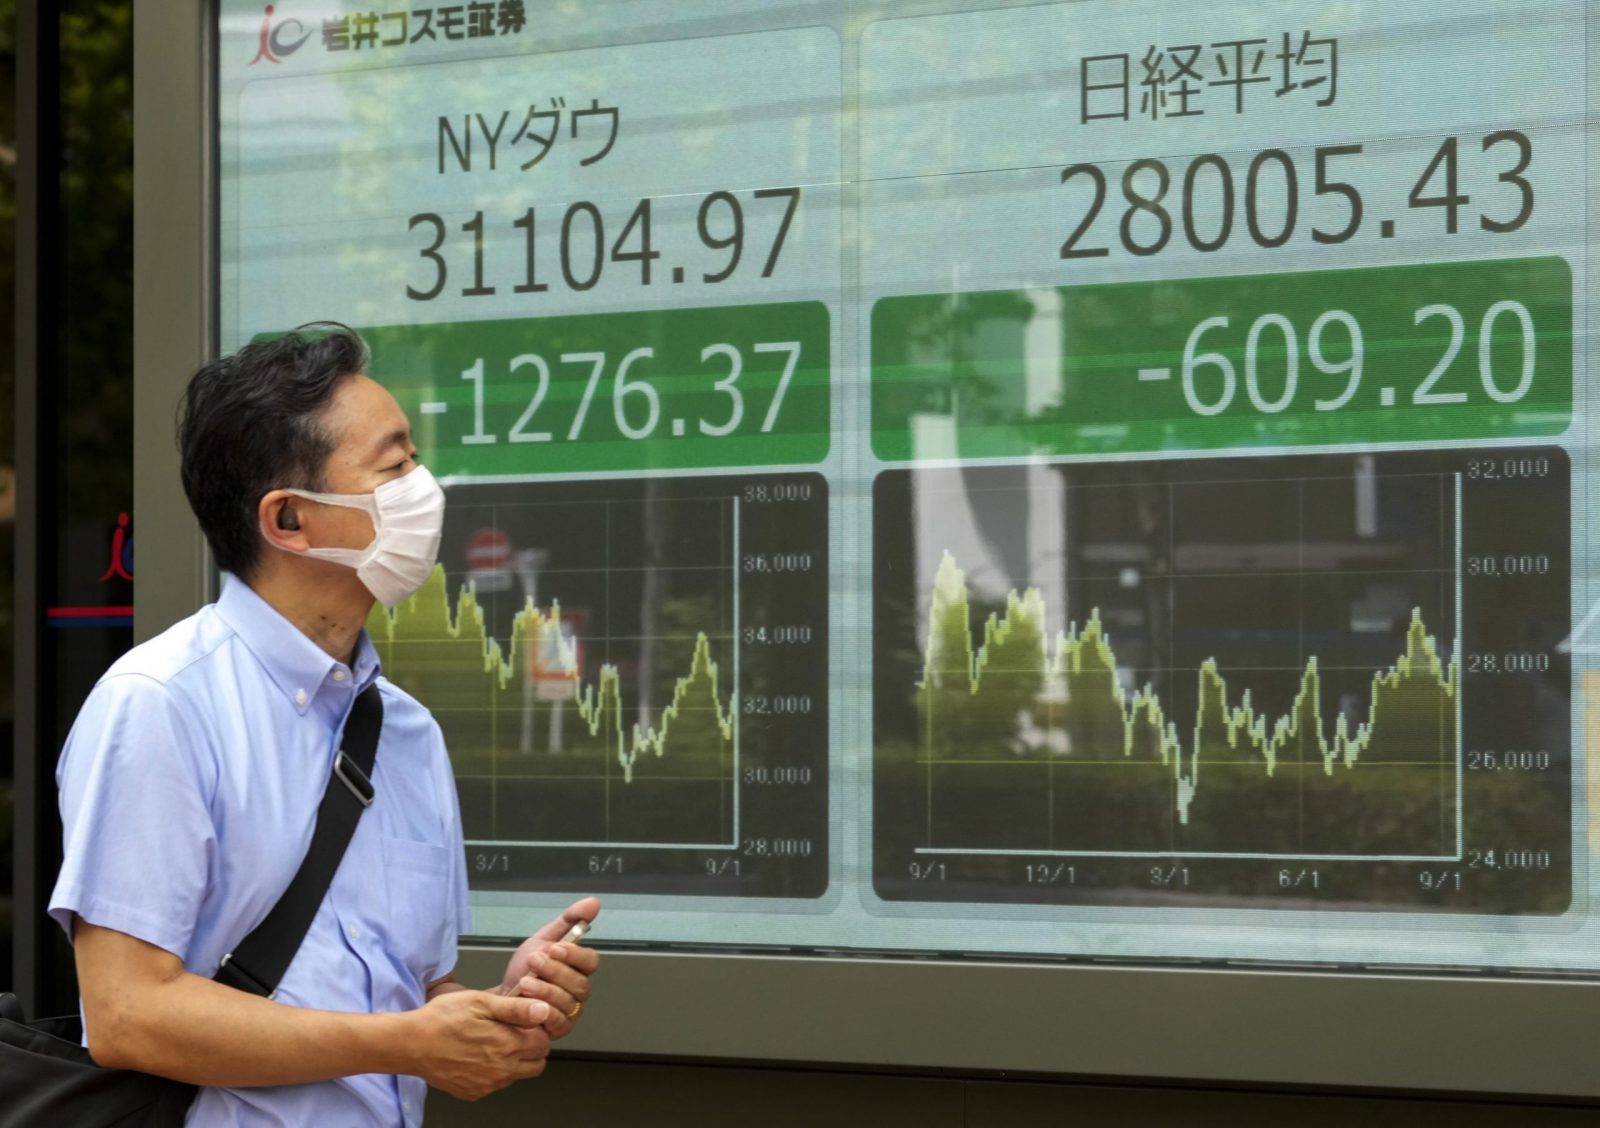 epa10182848 A pedestrian looks at a display showing declines in the Dow Jones Industrial Average (L) and the Nikkei Stock Average (R) during the morning trading session, in Tokyo, Japan, 14 September 2022. The Dow Jones Industrial Average in the US plunged over 1,200 points on 13 September. The Tokyo stock benchmark fell more than 800 points in the morning trading session on 14 September.  EPA/KIMIMASA MAYAMA